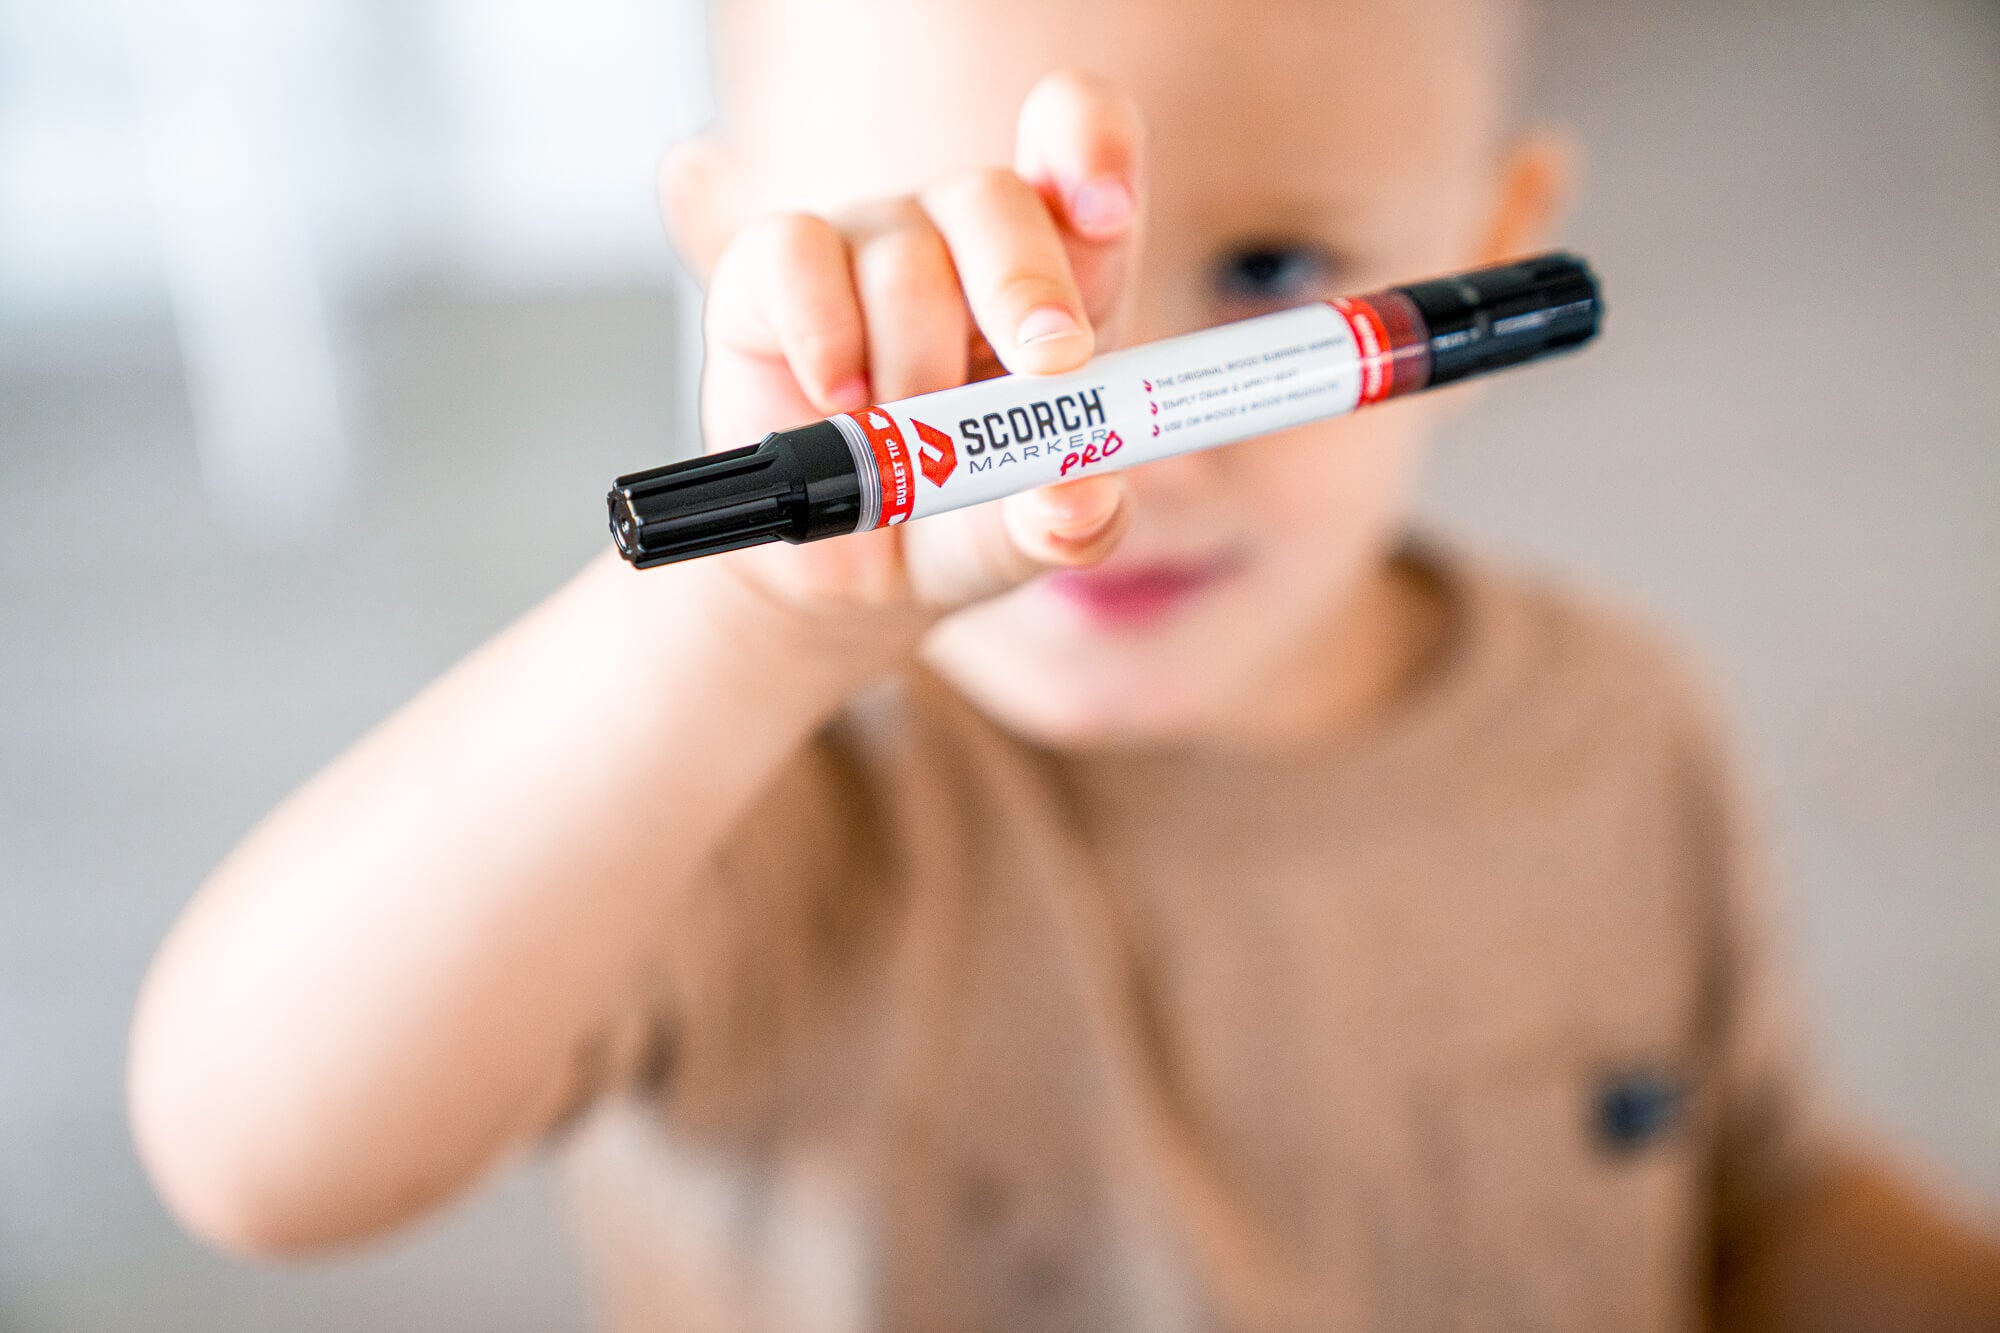 How to Buy the Best Wood Burning Kit for Kids This Christmas - Scorch Marker